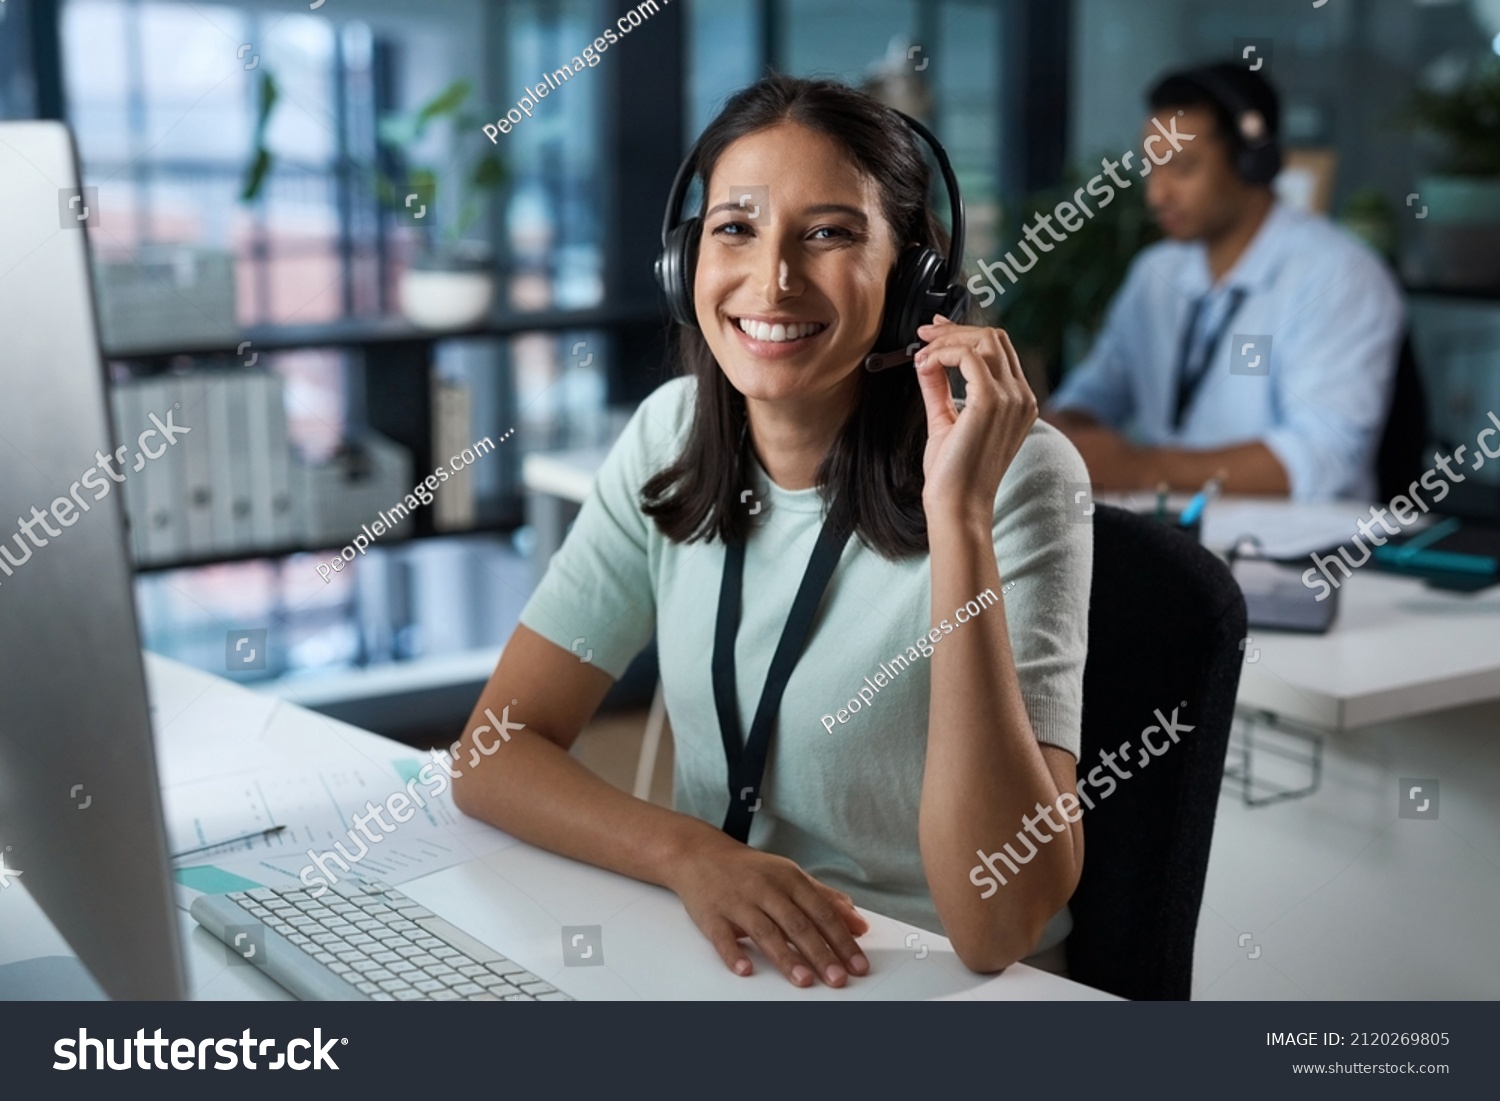 You havent heard quality until youve called us. Portrait of a young woman using a headset and computer in a modern office. #2120269805